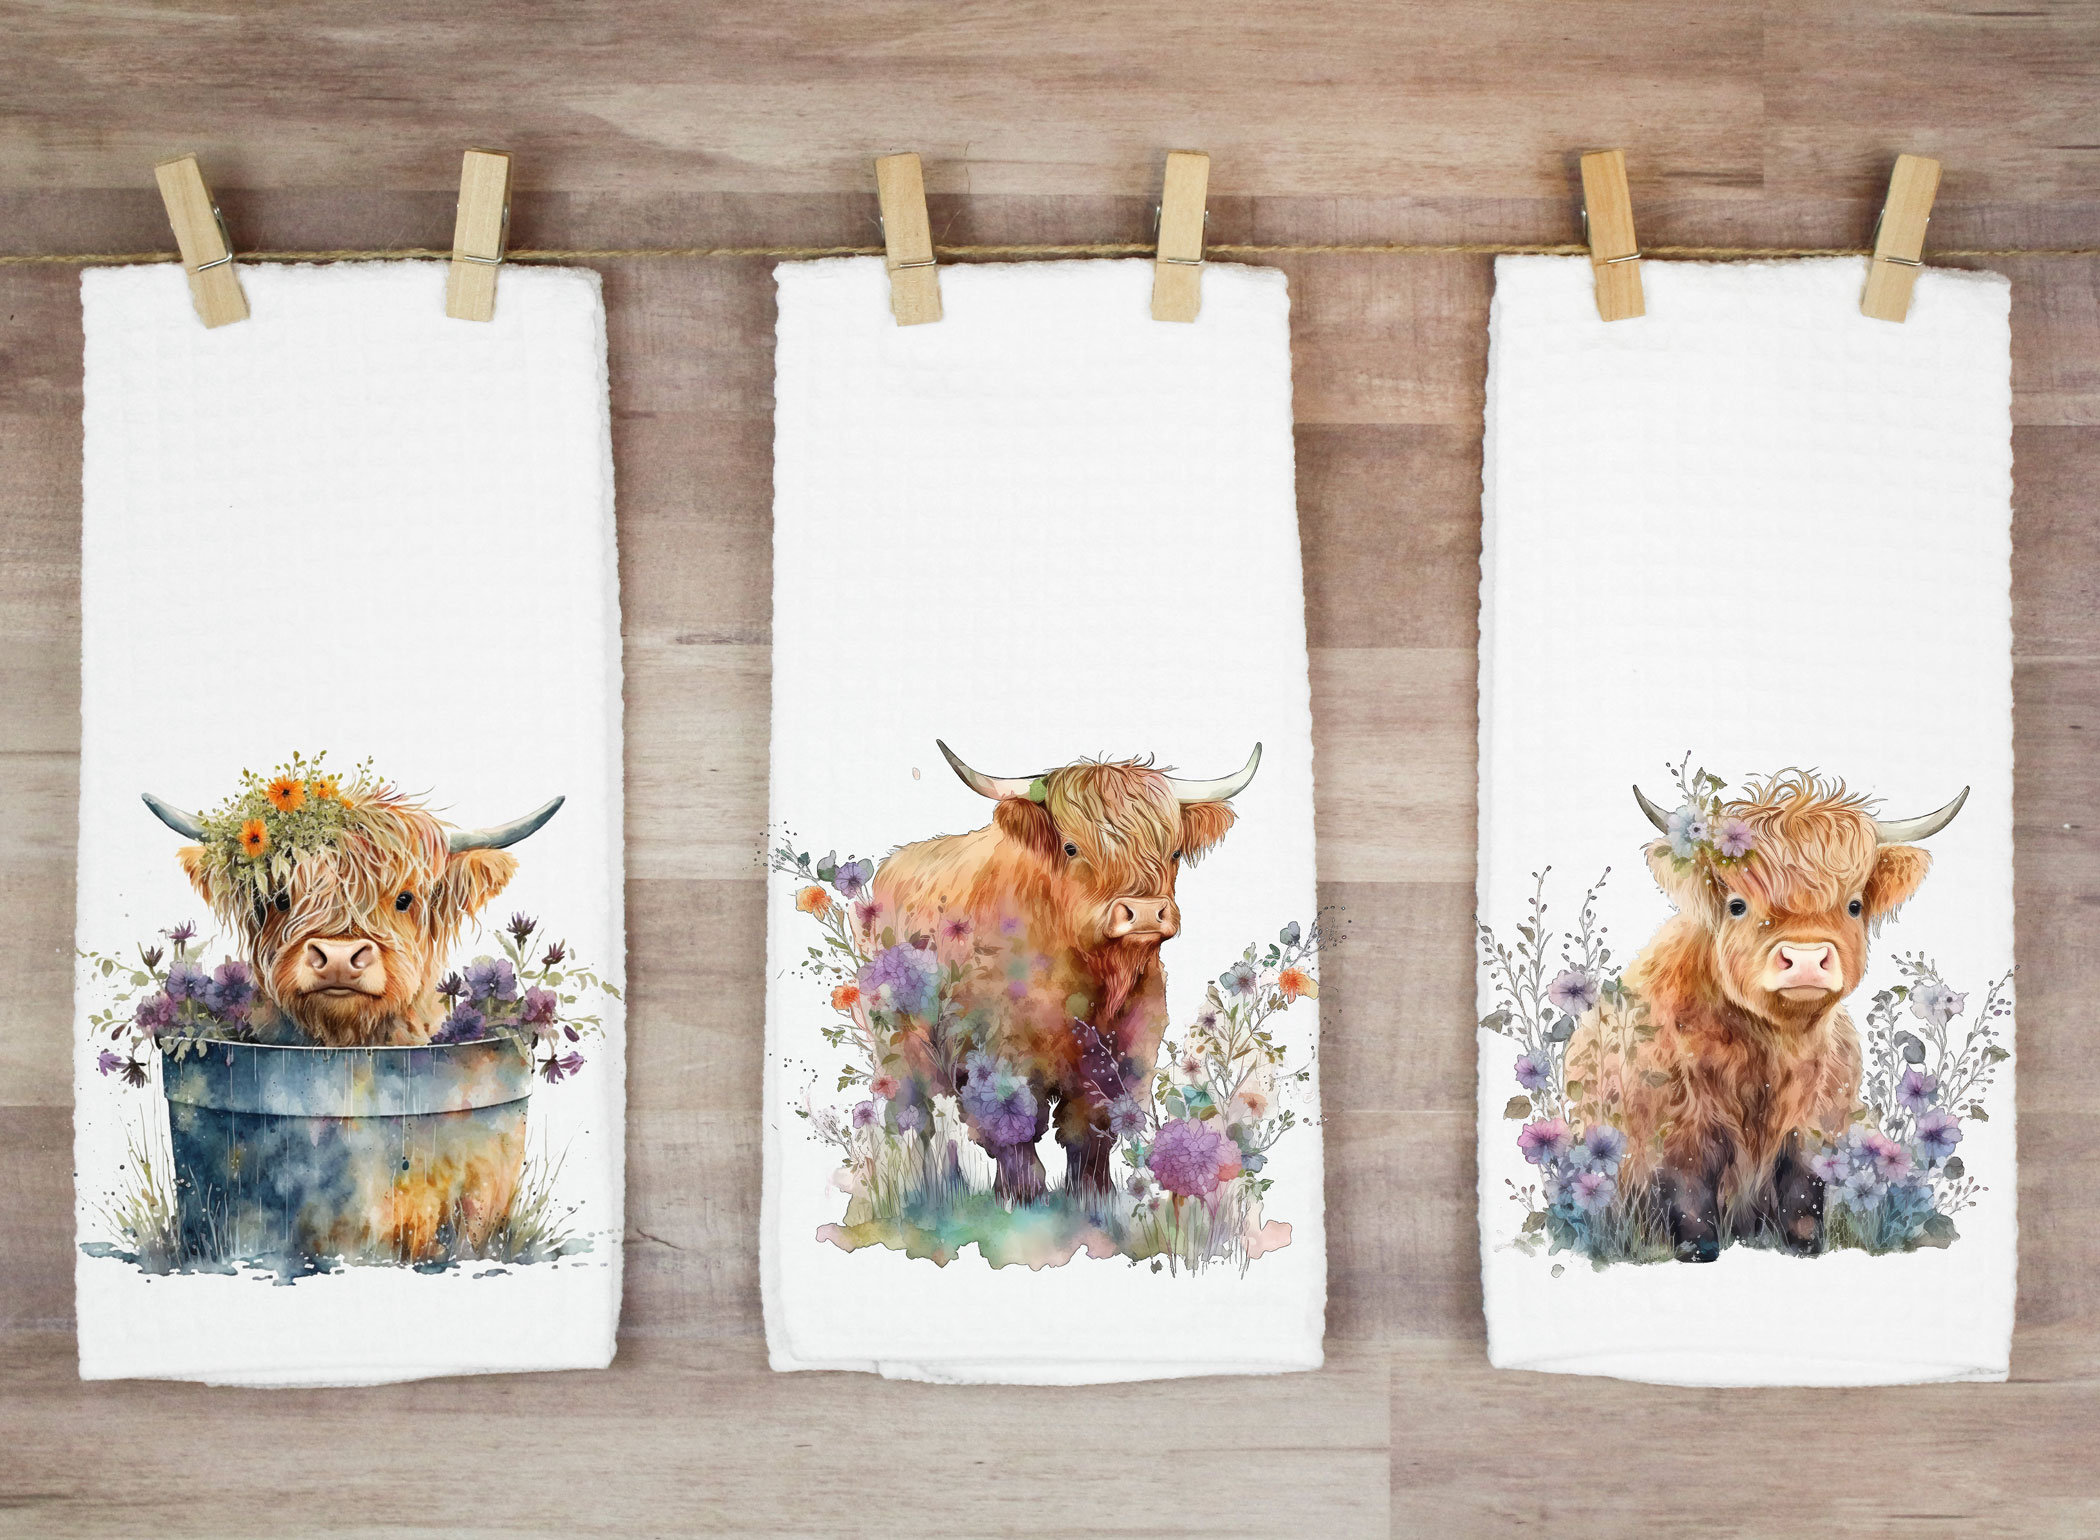 Funny farm animals highland cow with glasses novelty cotton tea towel